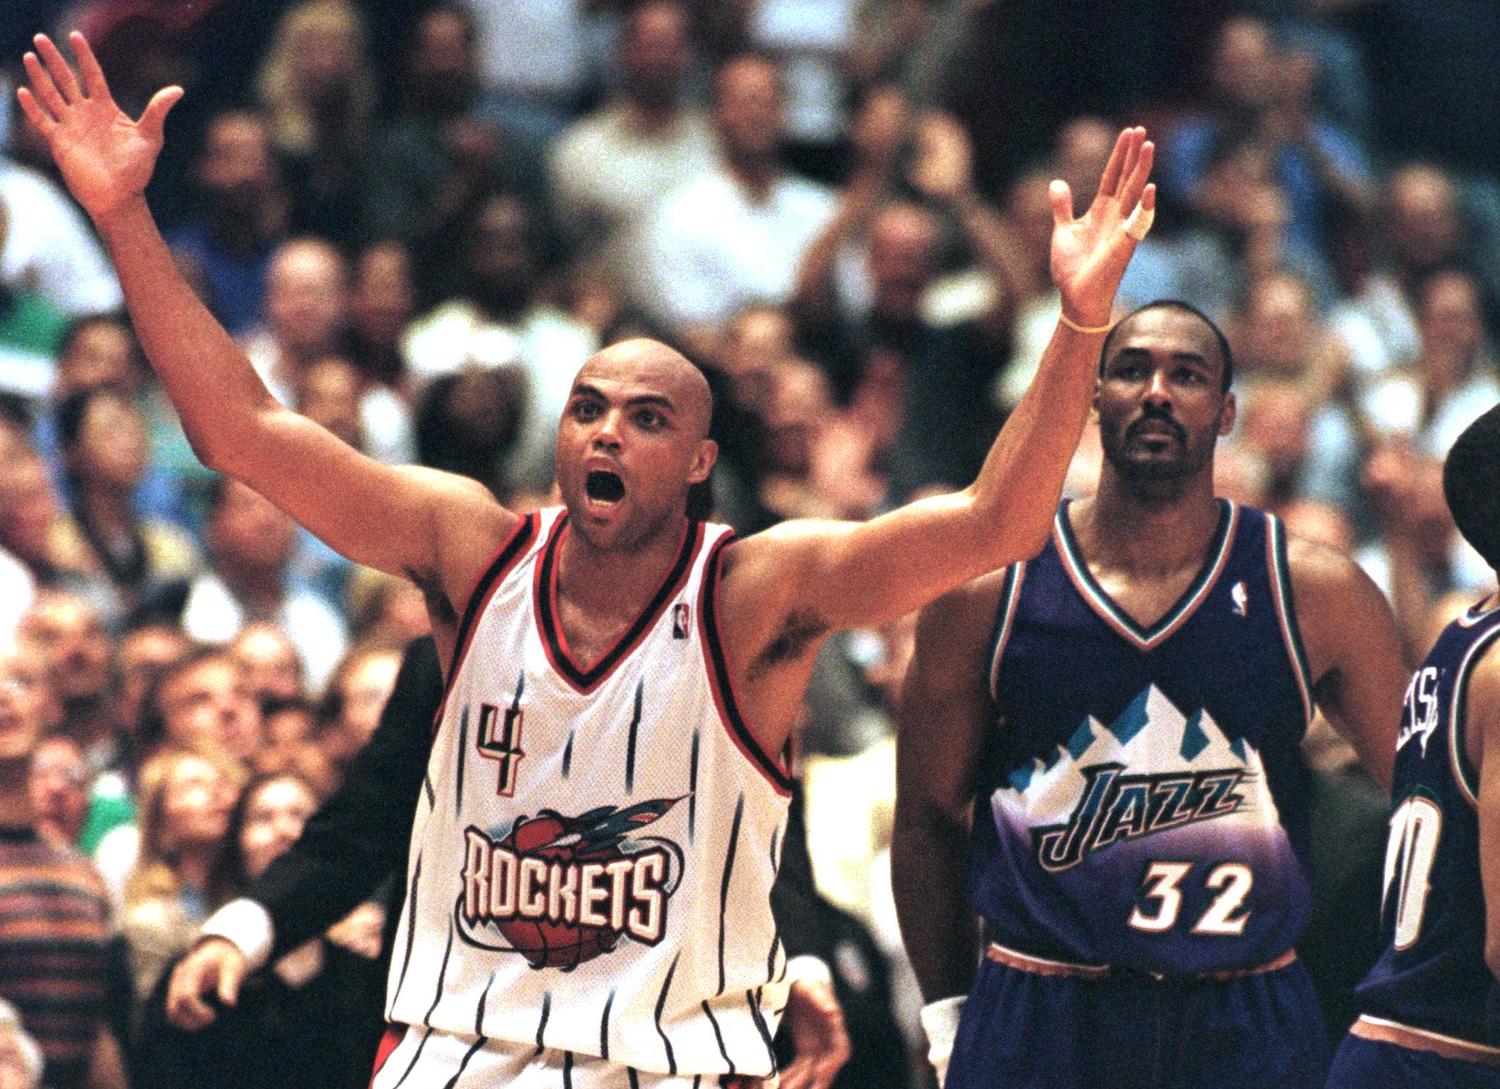 NBA veteran Charles Barkley reacts during his time with the Houston Rockets.